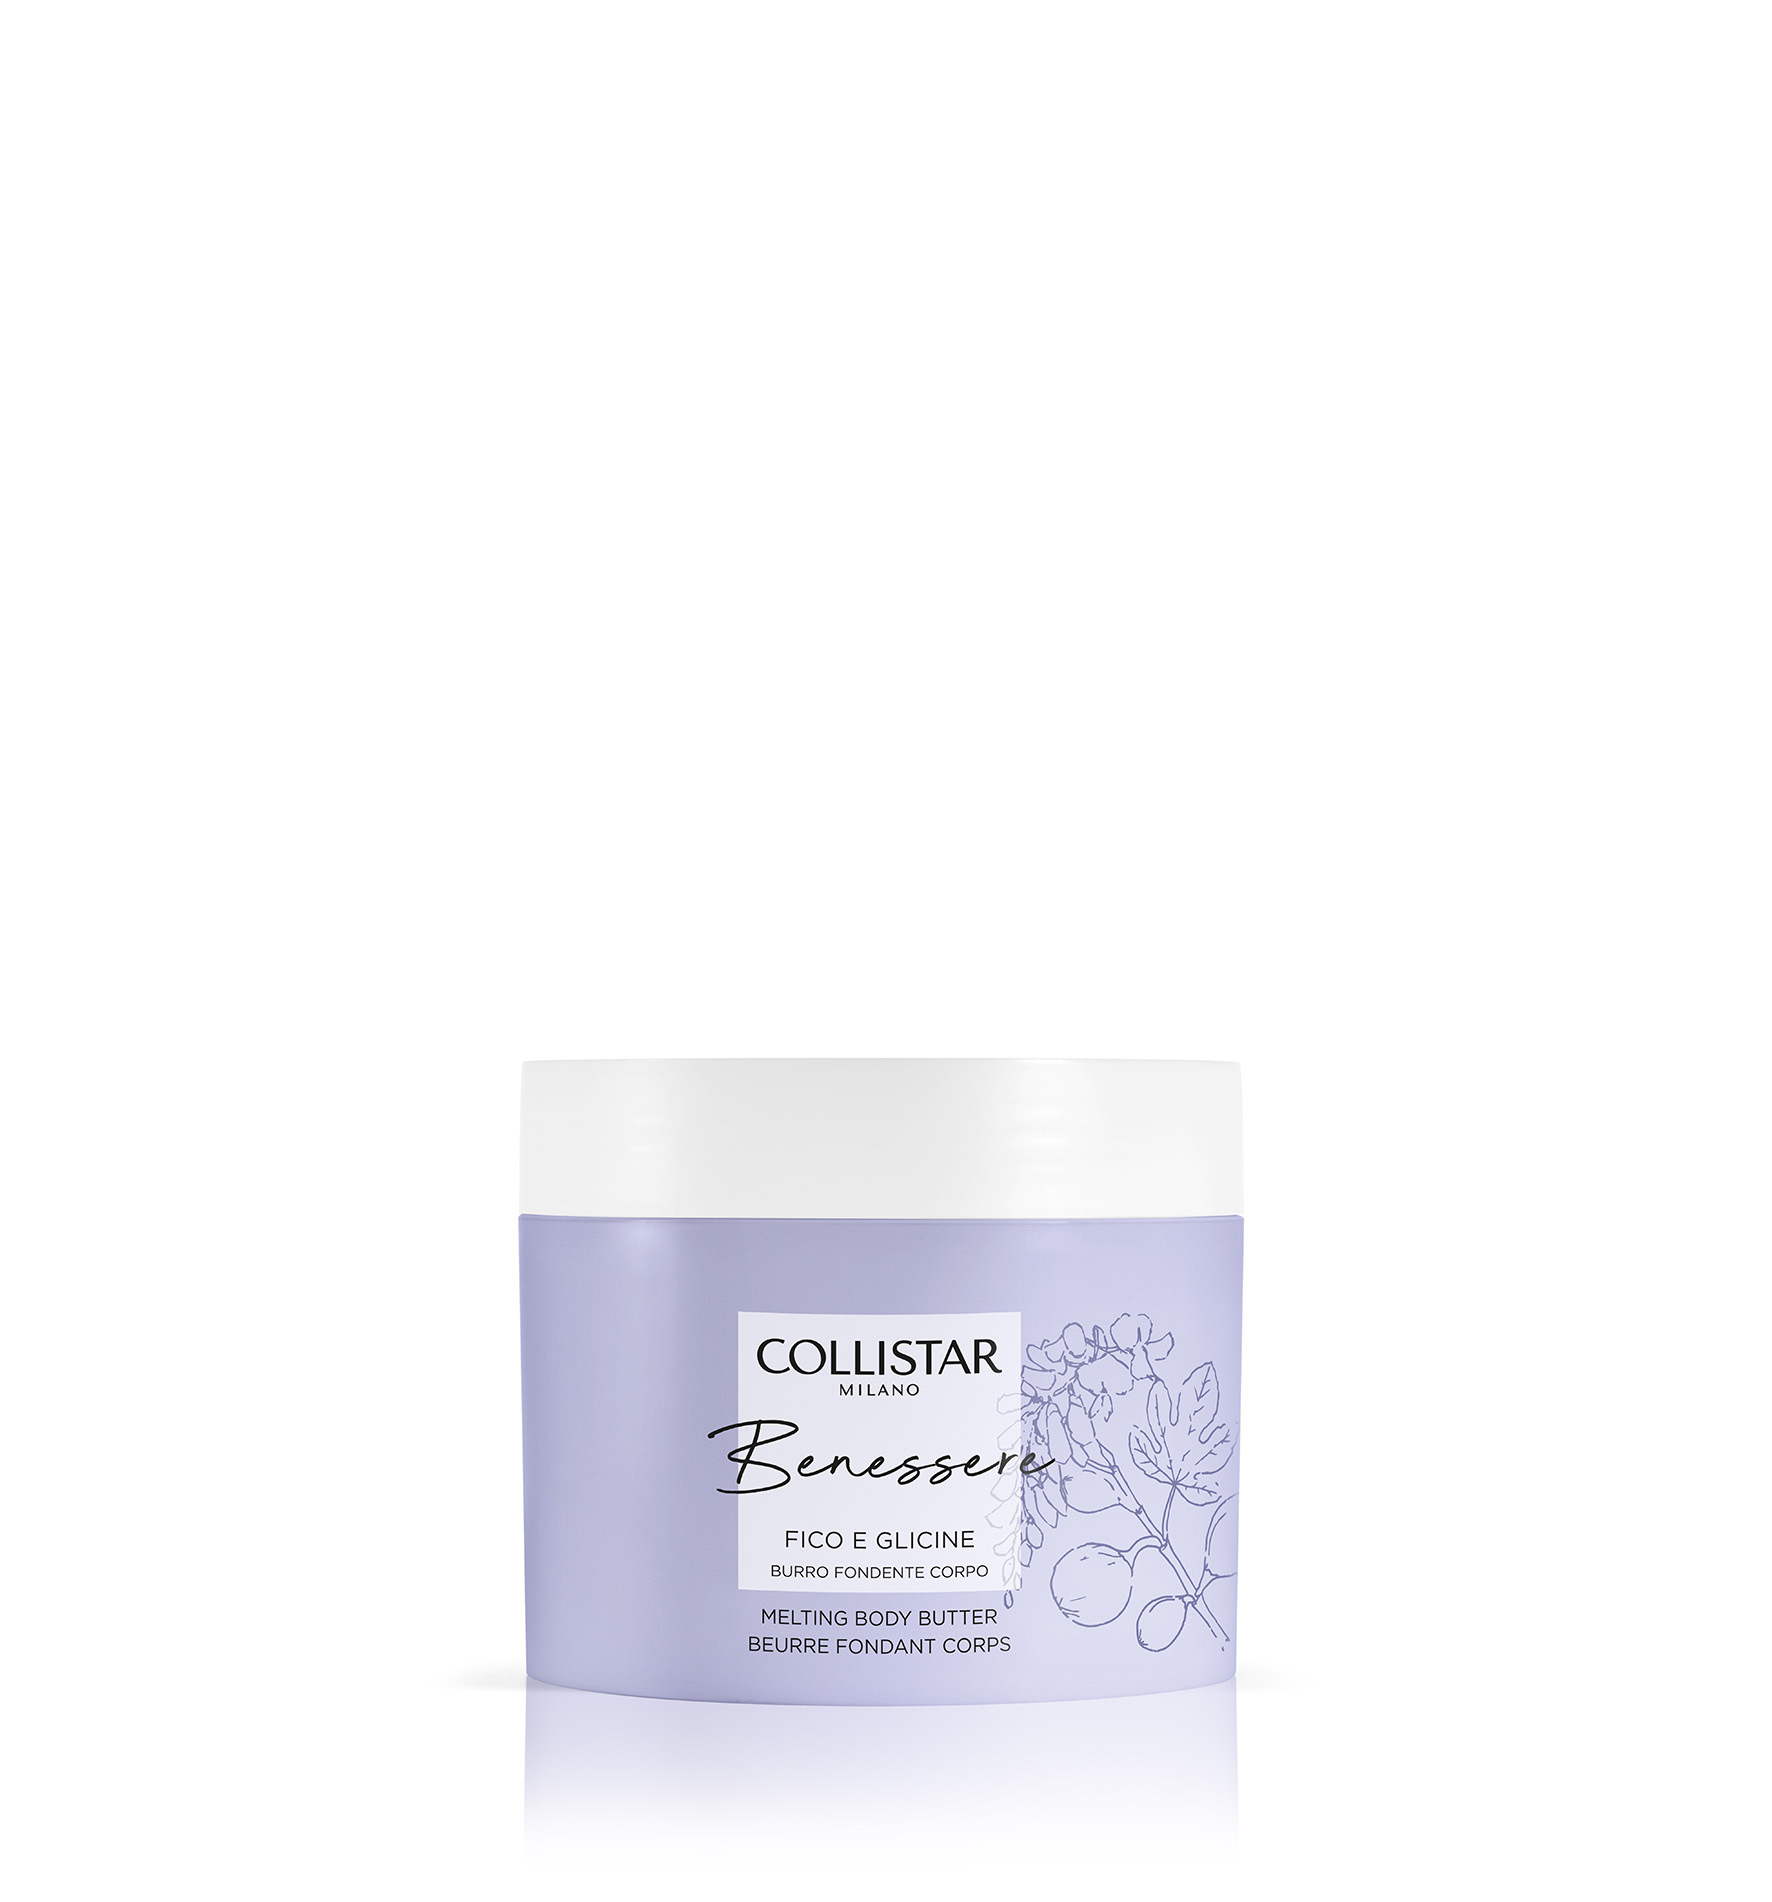 BENESSERE FIG AND WISTERIA MELTING BODY BUTTER | Collistar - Shop Online Ufficiale